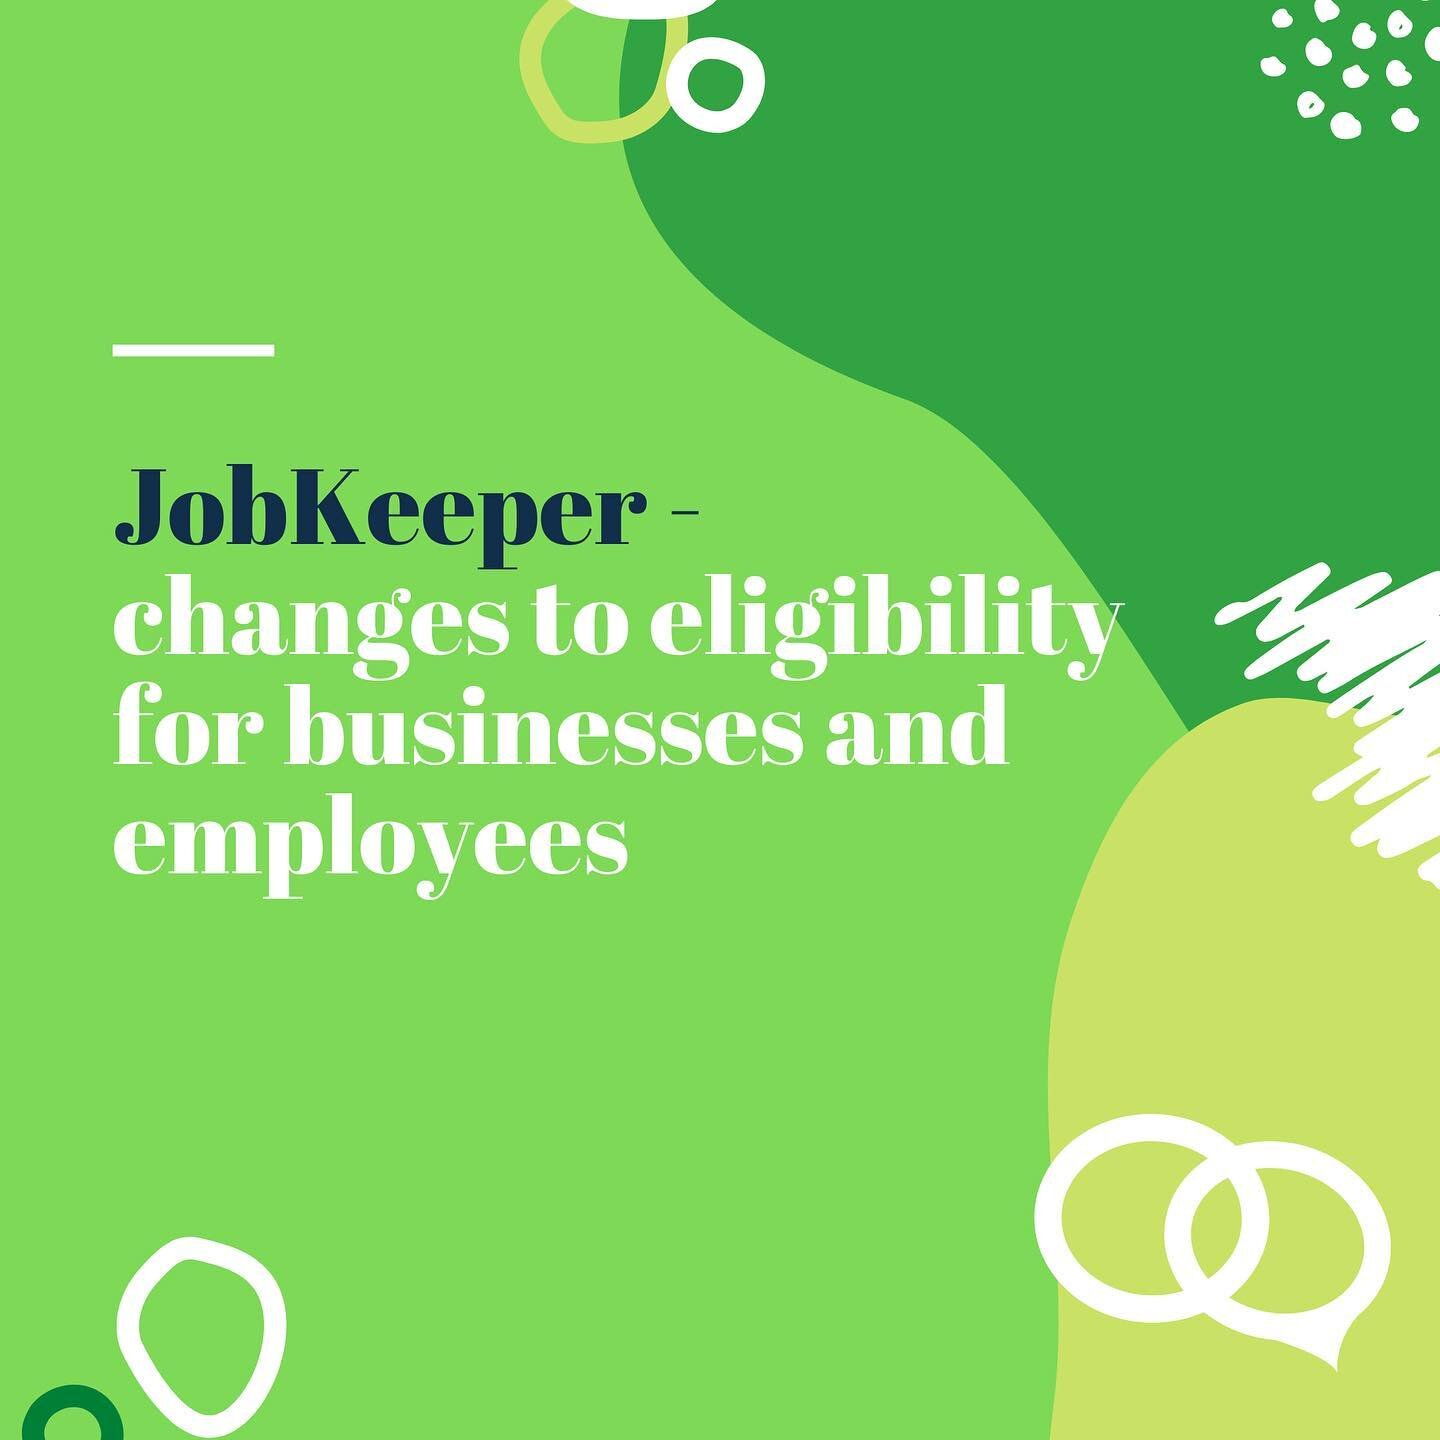 An extension of the JobKeeper stimulus package has been unveiled by the federal government in addition to changed eligibility criteria for both businesses and individuals. Link in bio.
.
.
.
.
#coronavirus #covid19 #sydney #australia #government #eco